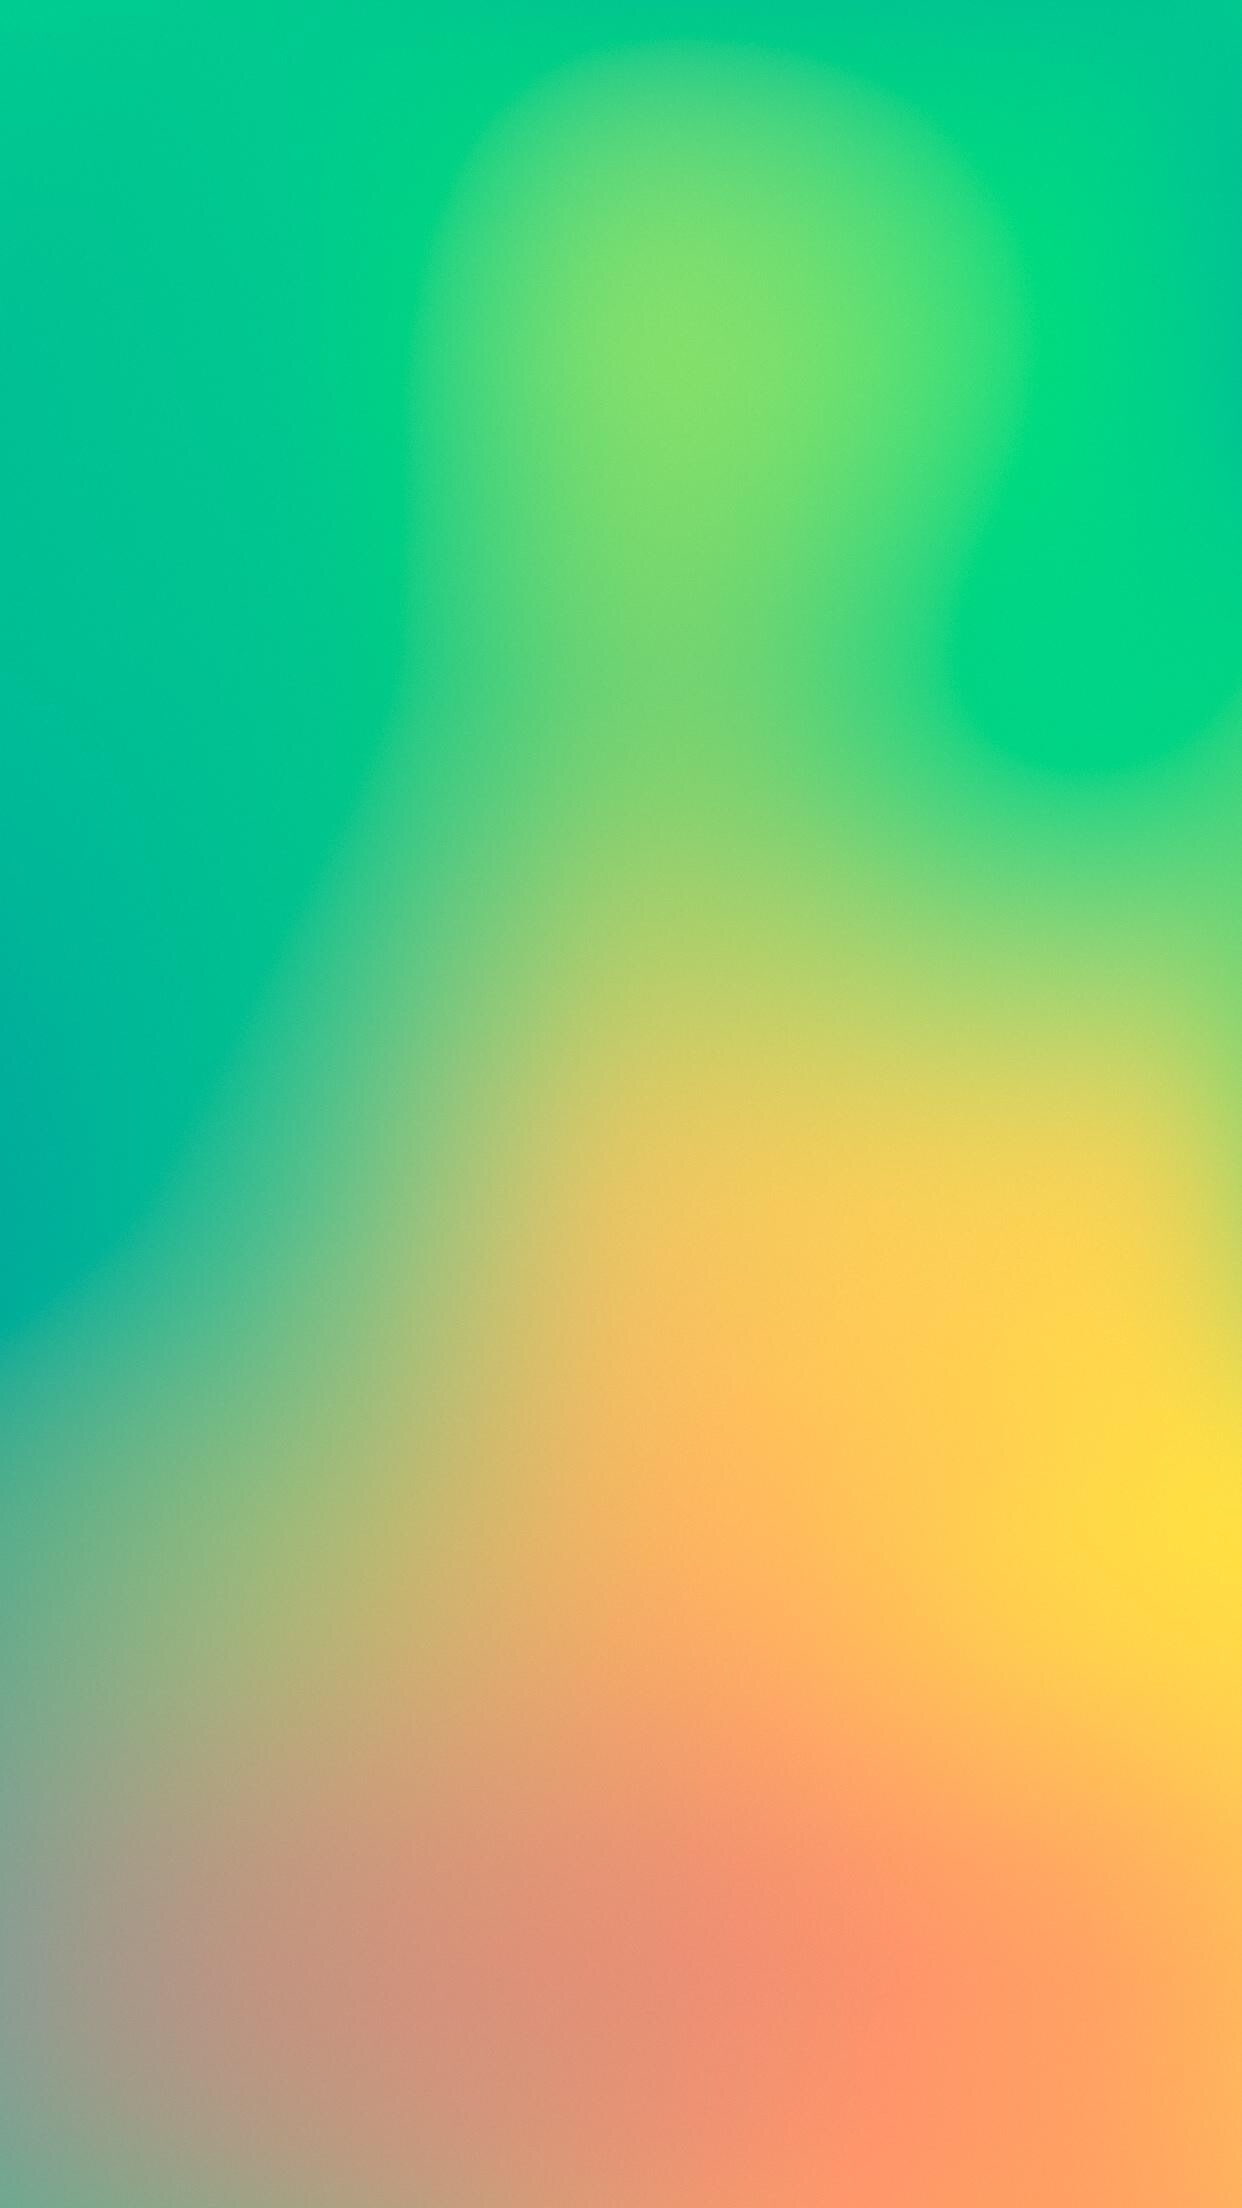 blurred, colorful, vertical, portrait display, abstract, backgrounds